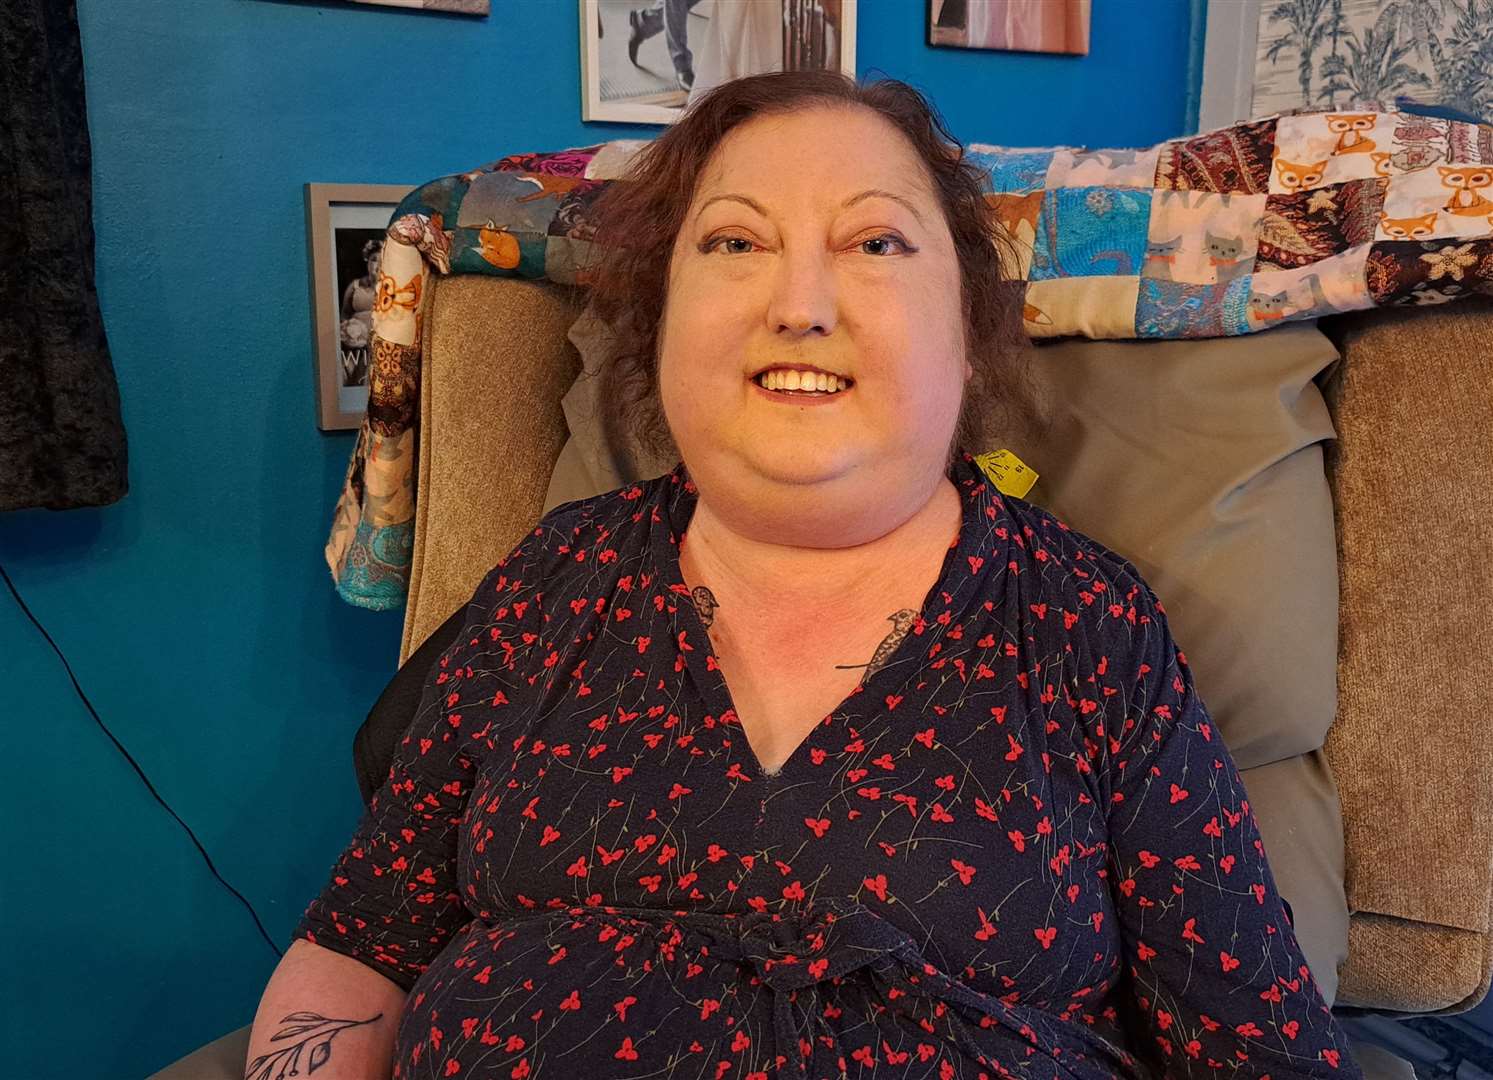 Charmaine Jannone was diagnosed with a rare brain cancer in 2020, and was given just weeks to live